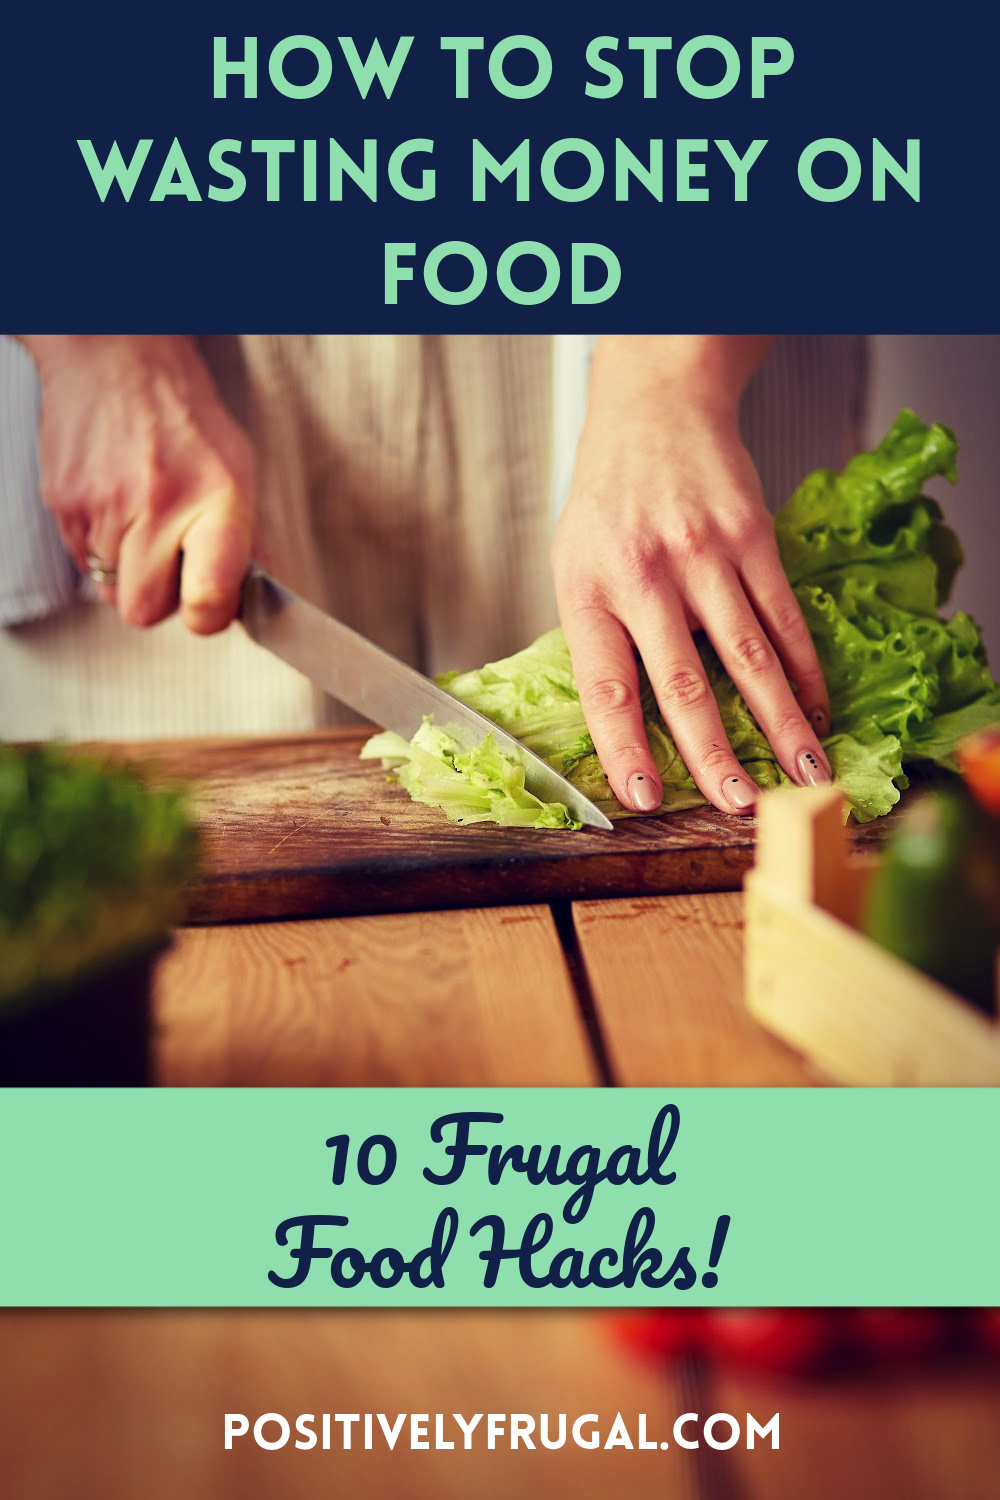 How To Stop Wasting Money on Food 10 Frugal Food Hacks by PositivelyFrugal.com